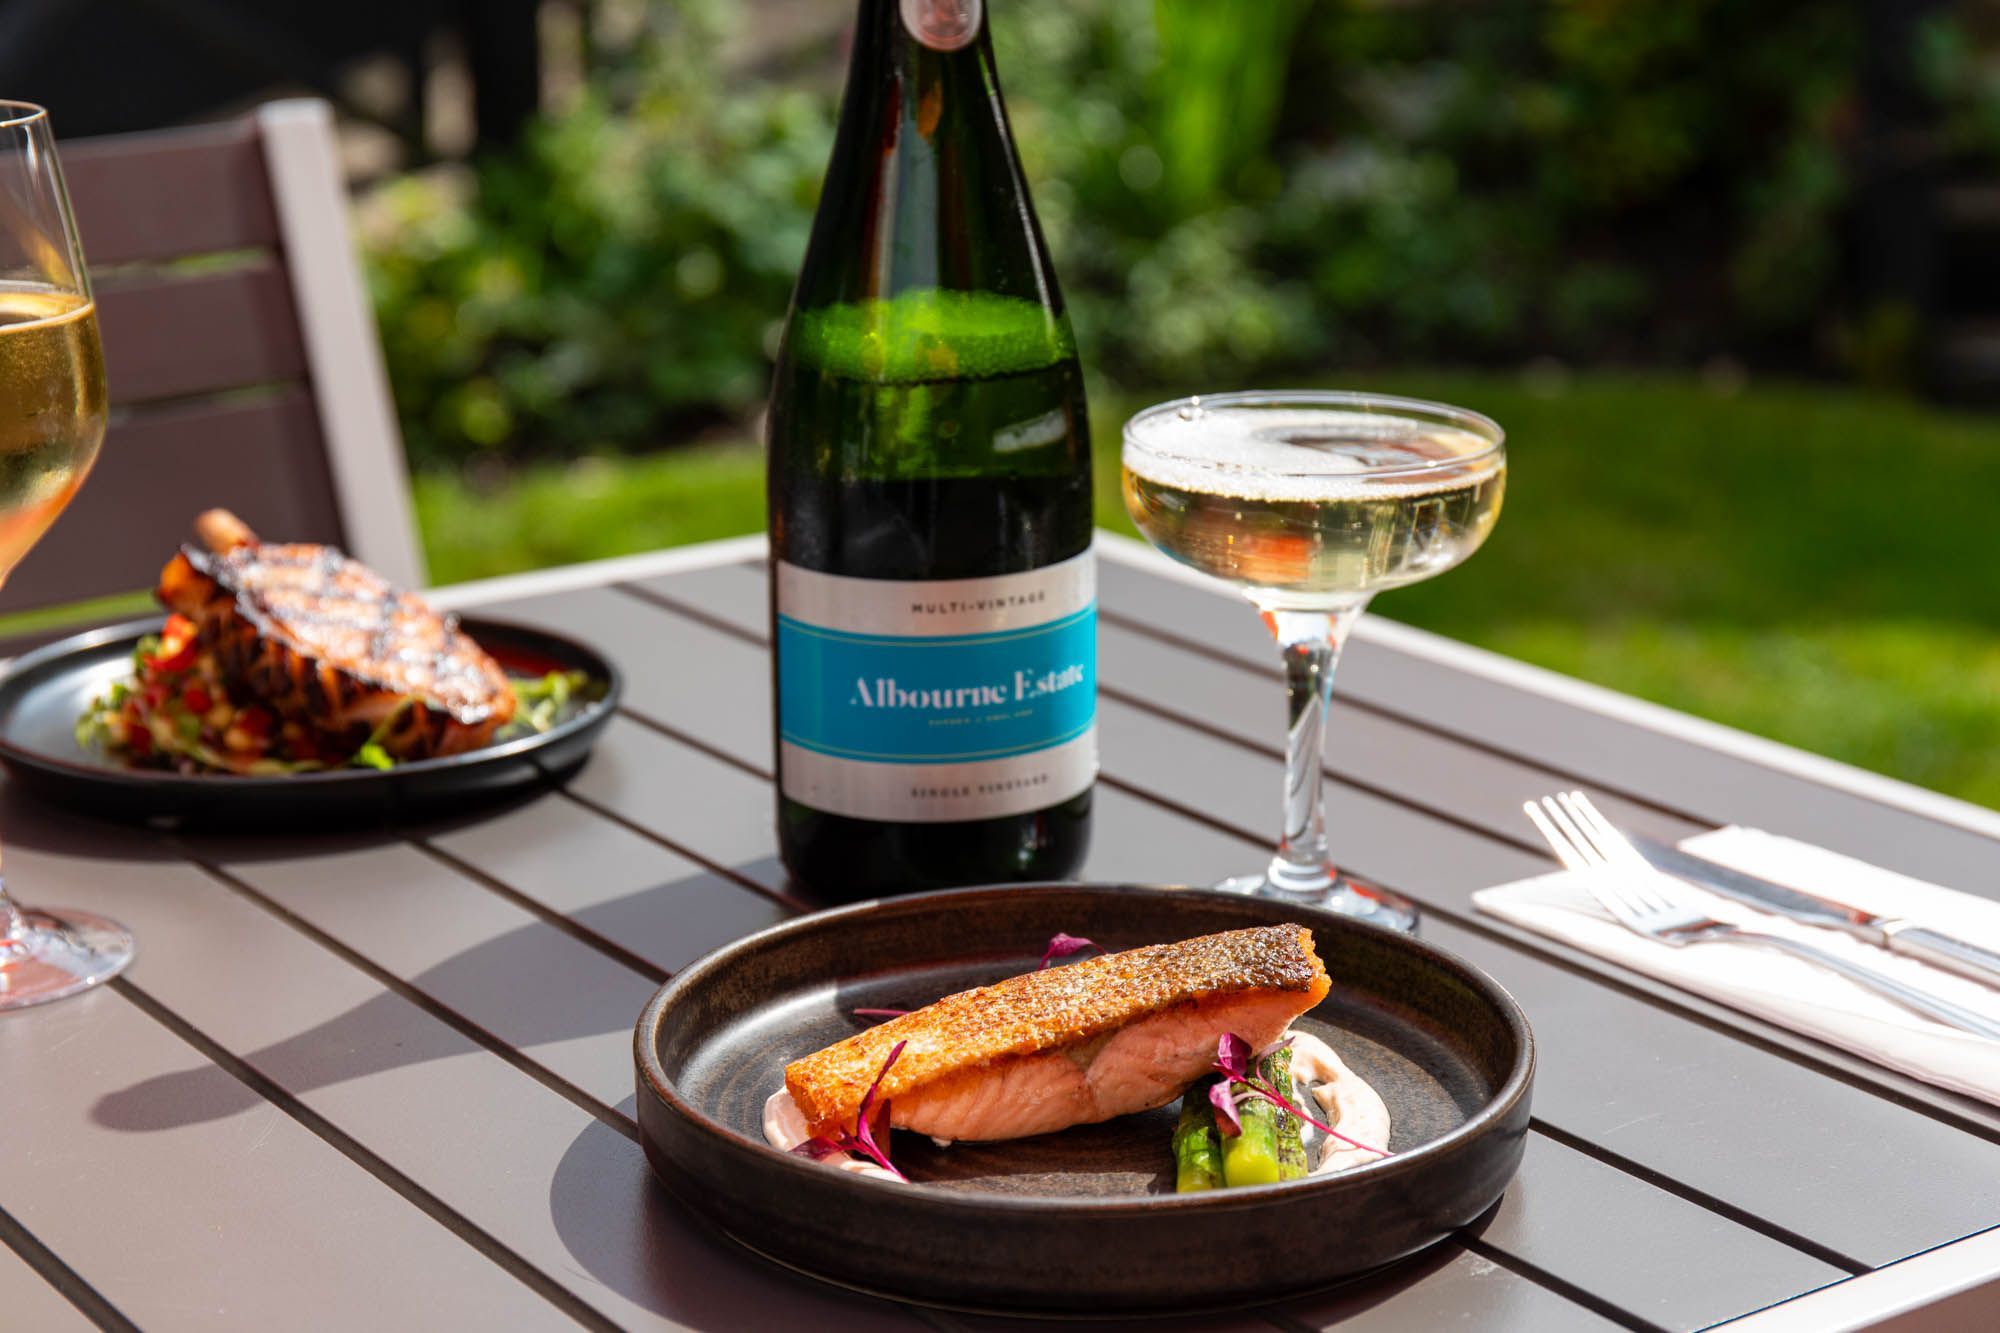 outdoor shot of the salmon dish served with glass of Albourne wine